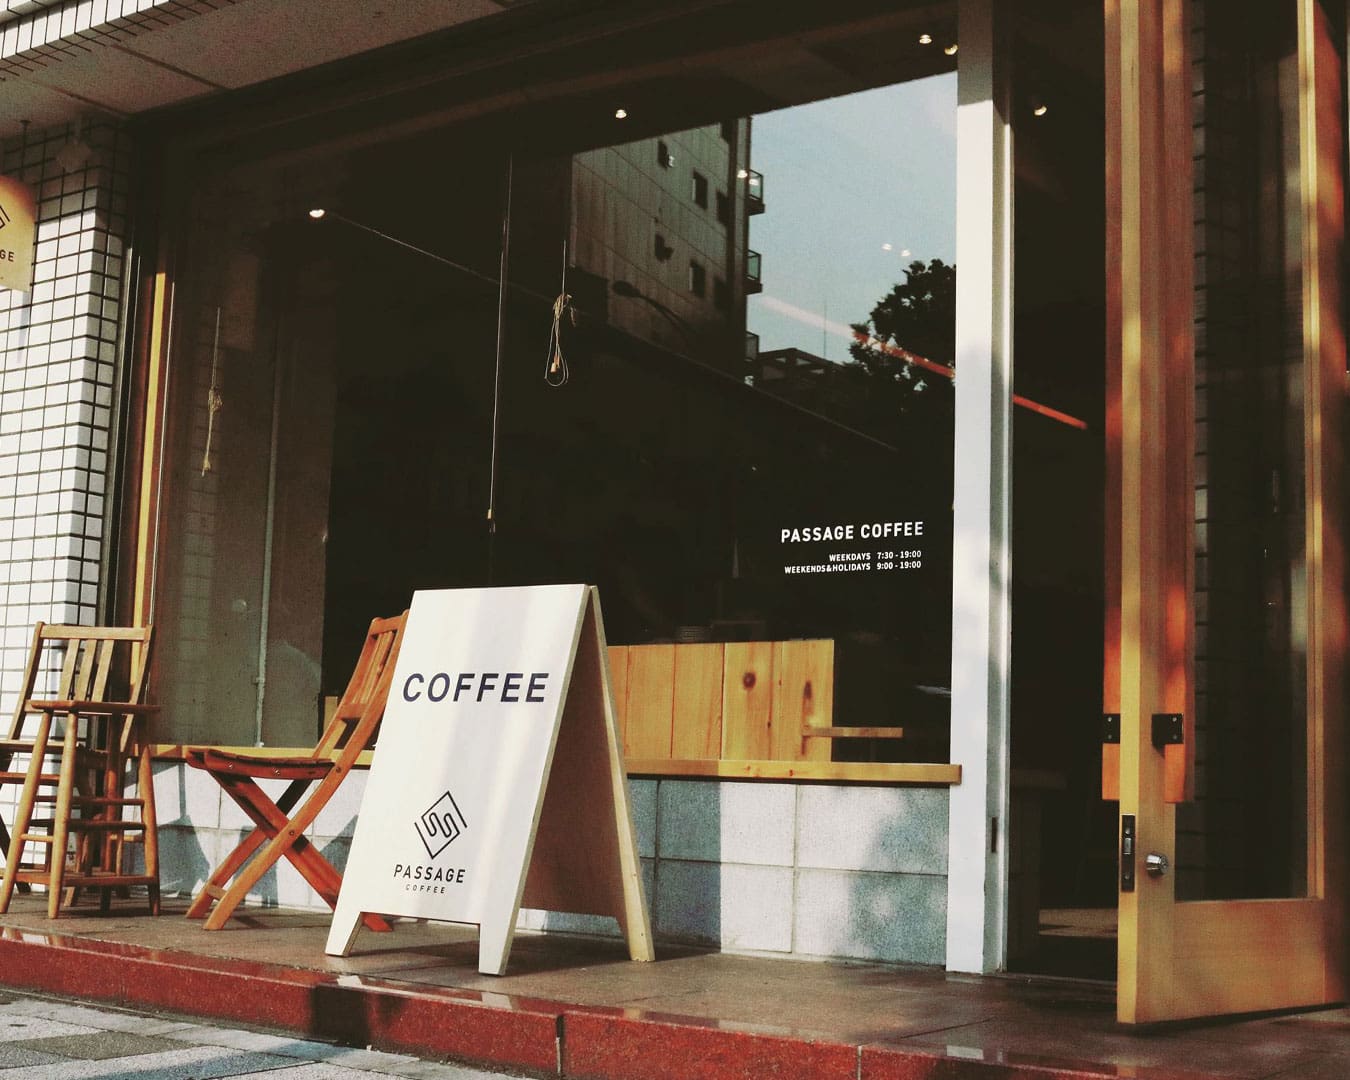 Outside Passage Coffee in Tokyo, a sign reading 'coffee' stands before a large window.